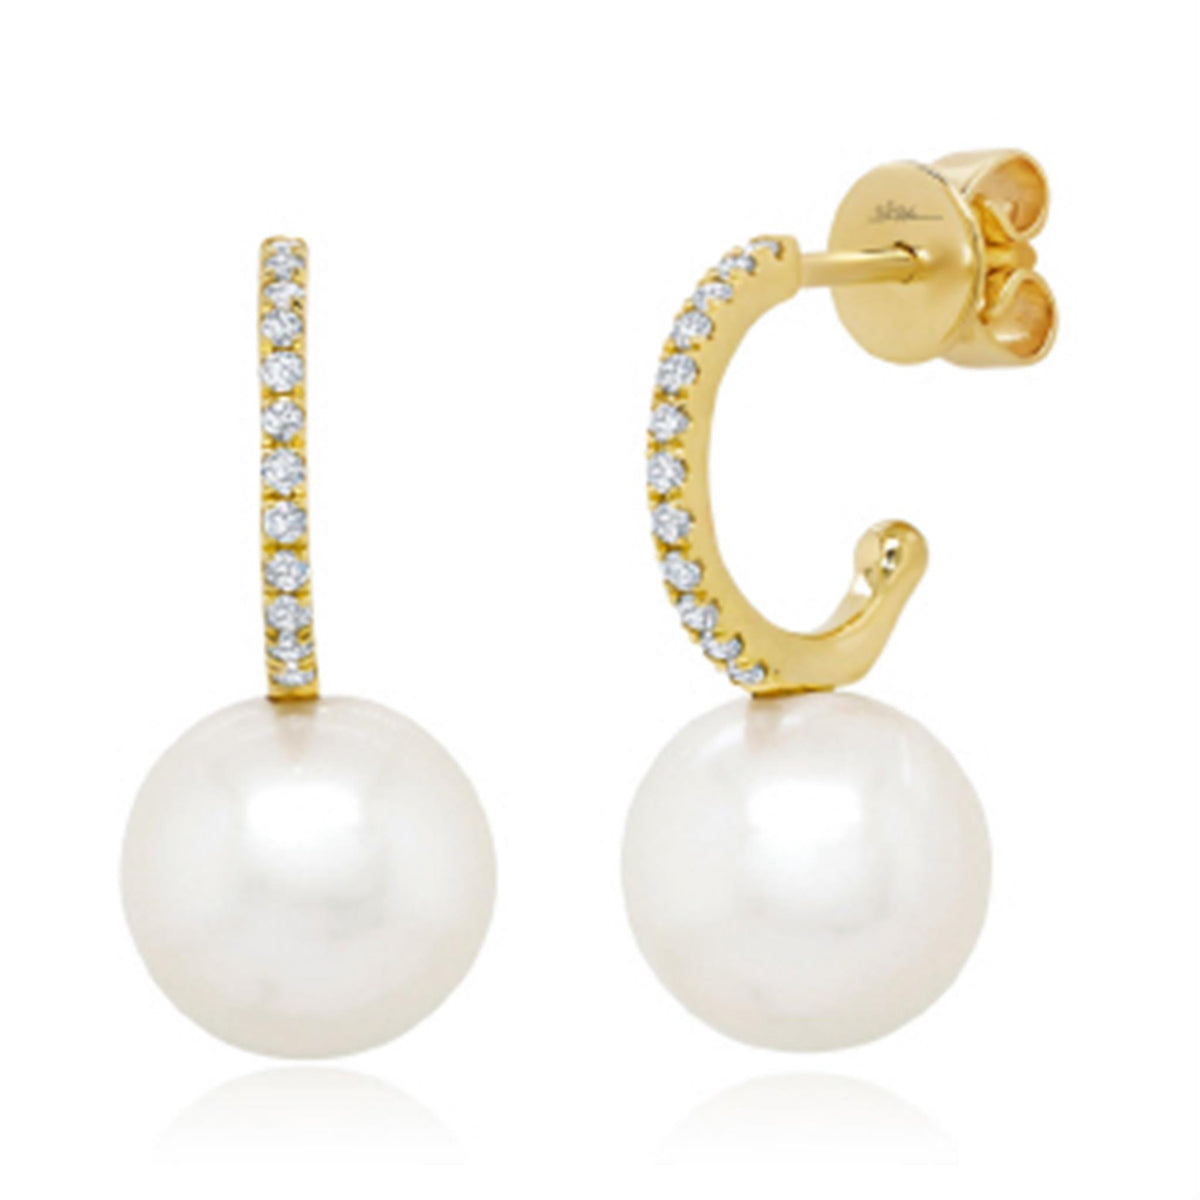 Shy Creation Gold Diamond Hoop Earrings with Cultured Pearls